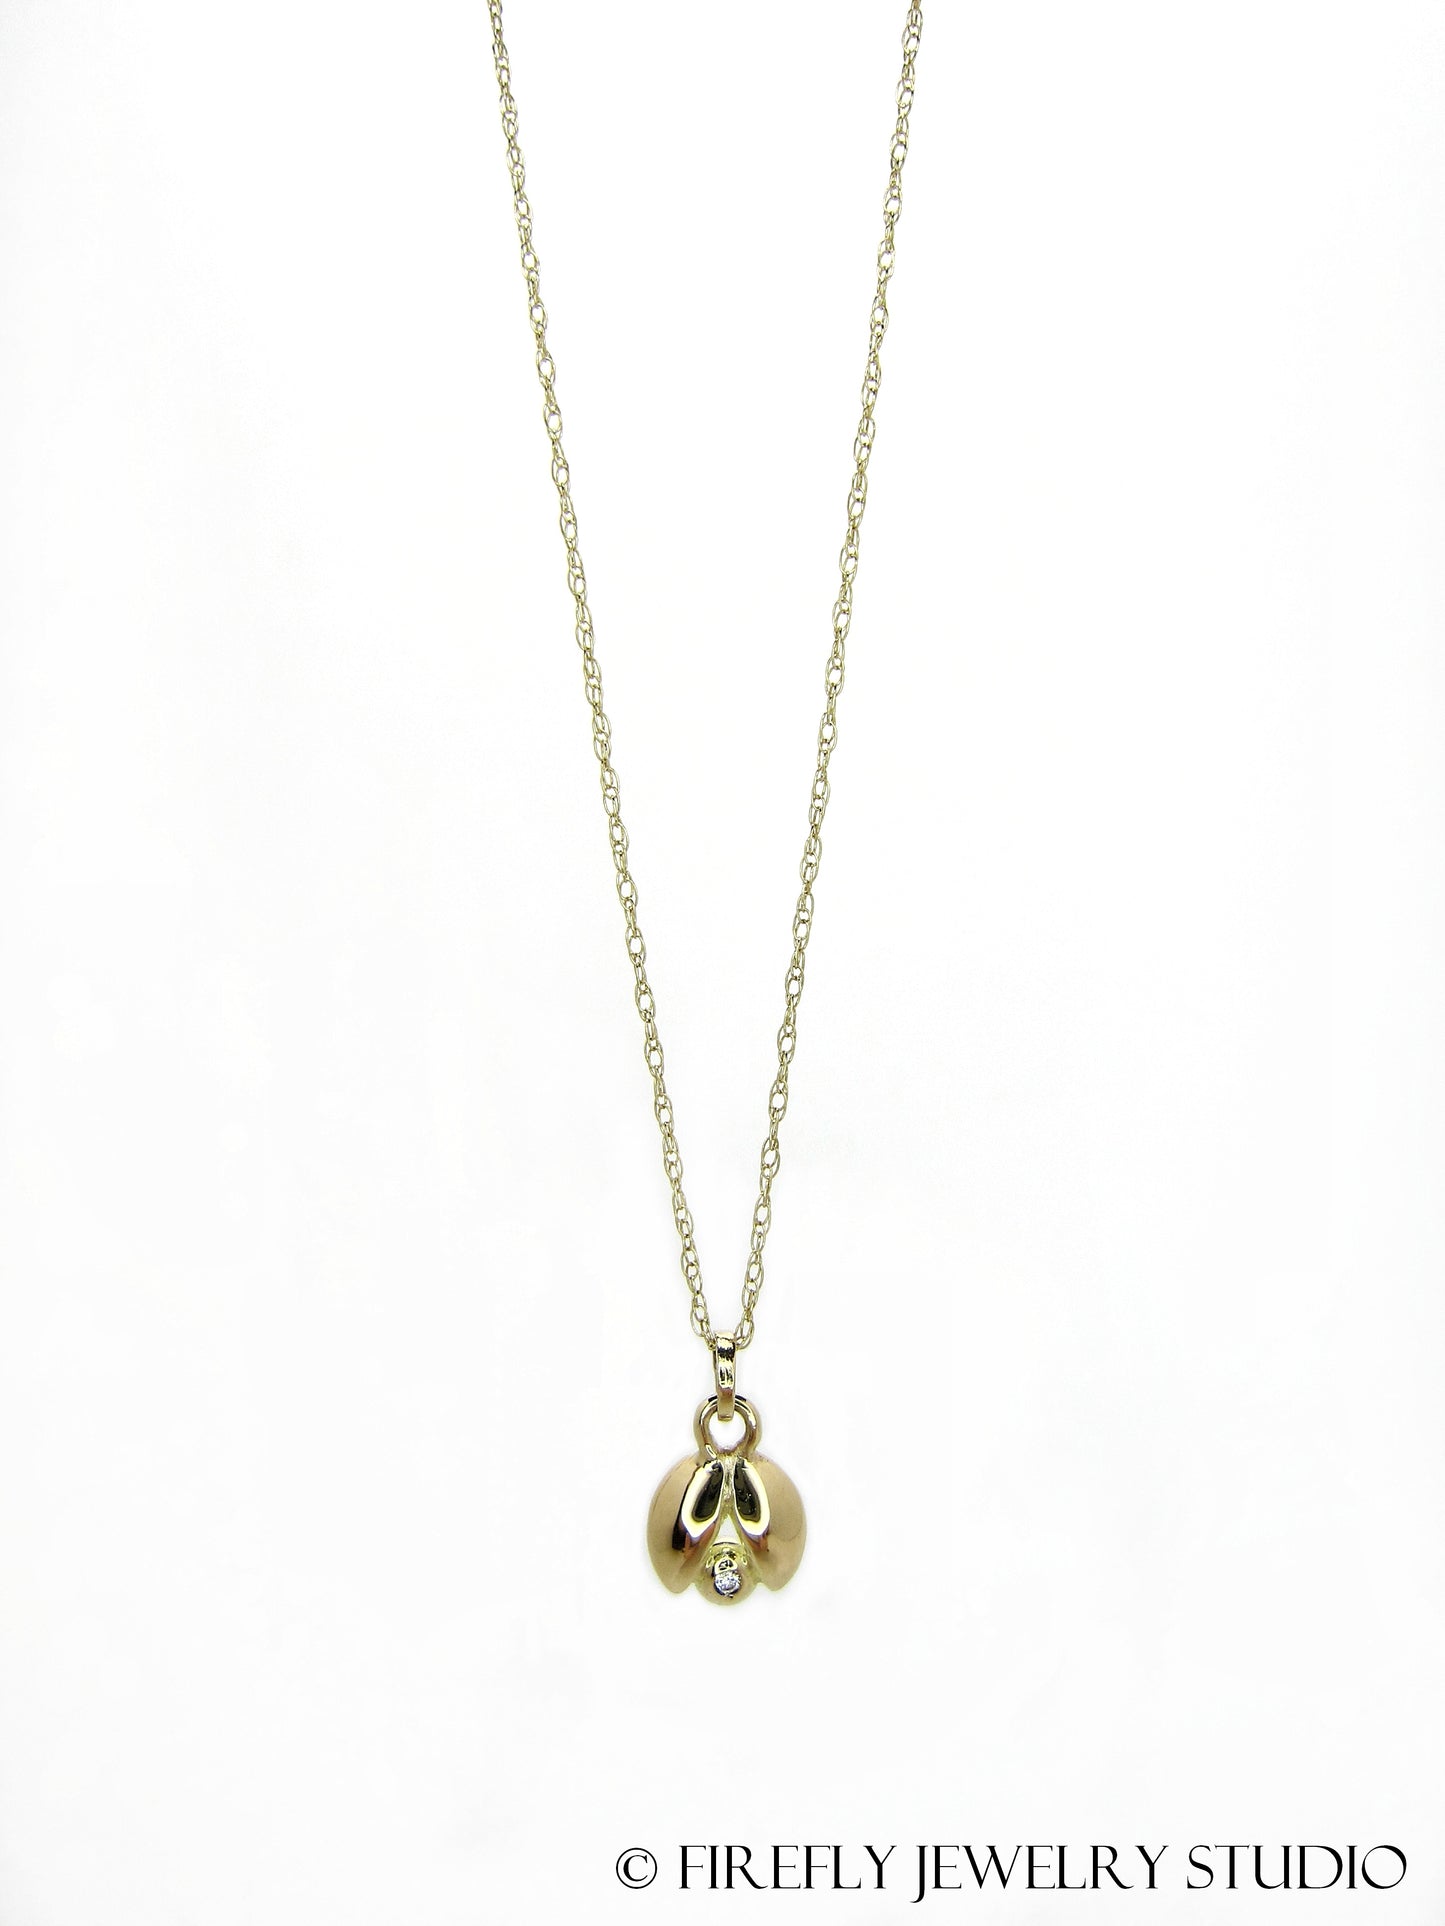 18k Yellow Gold Mini-Firefly Necklace with Diamond - Made to Order - Firefly Jewelry Studio